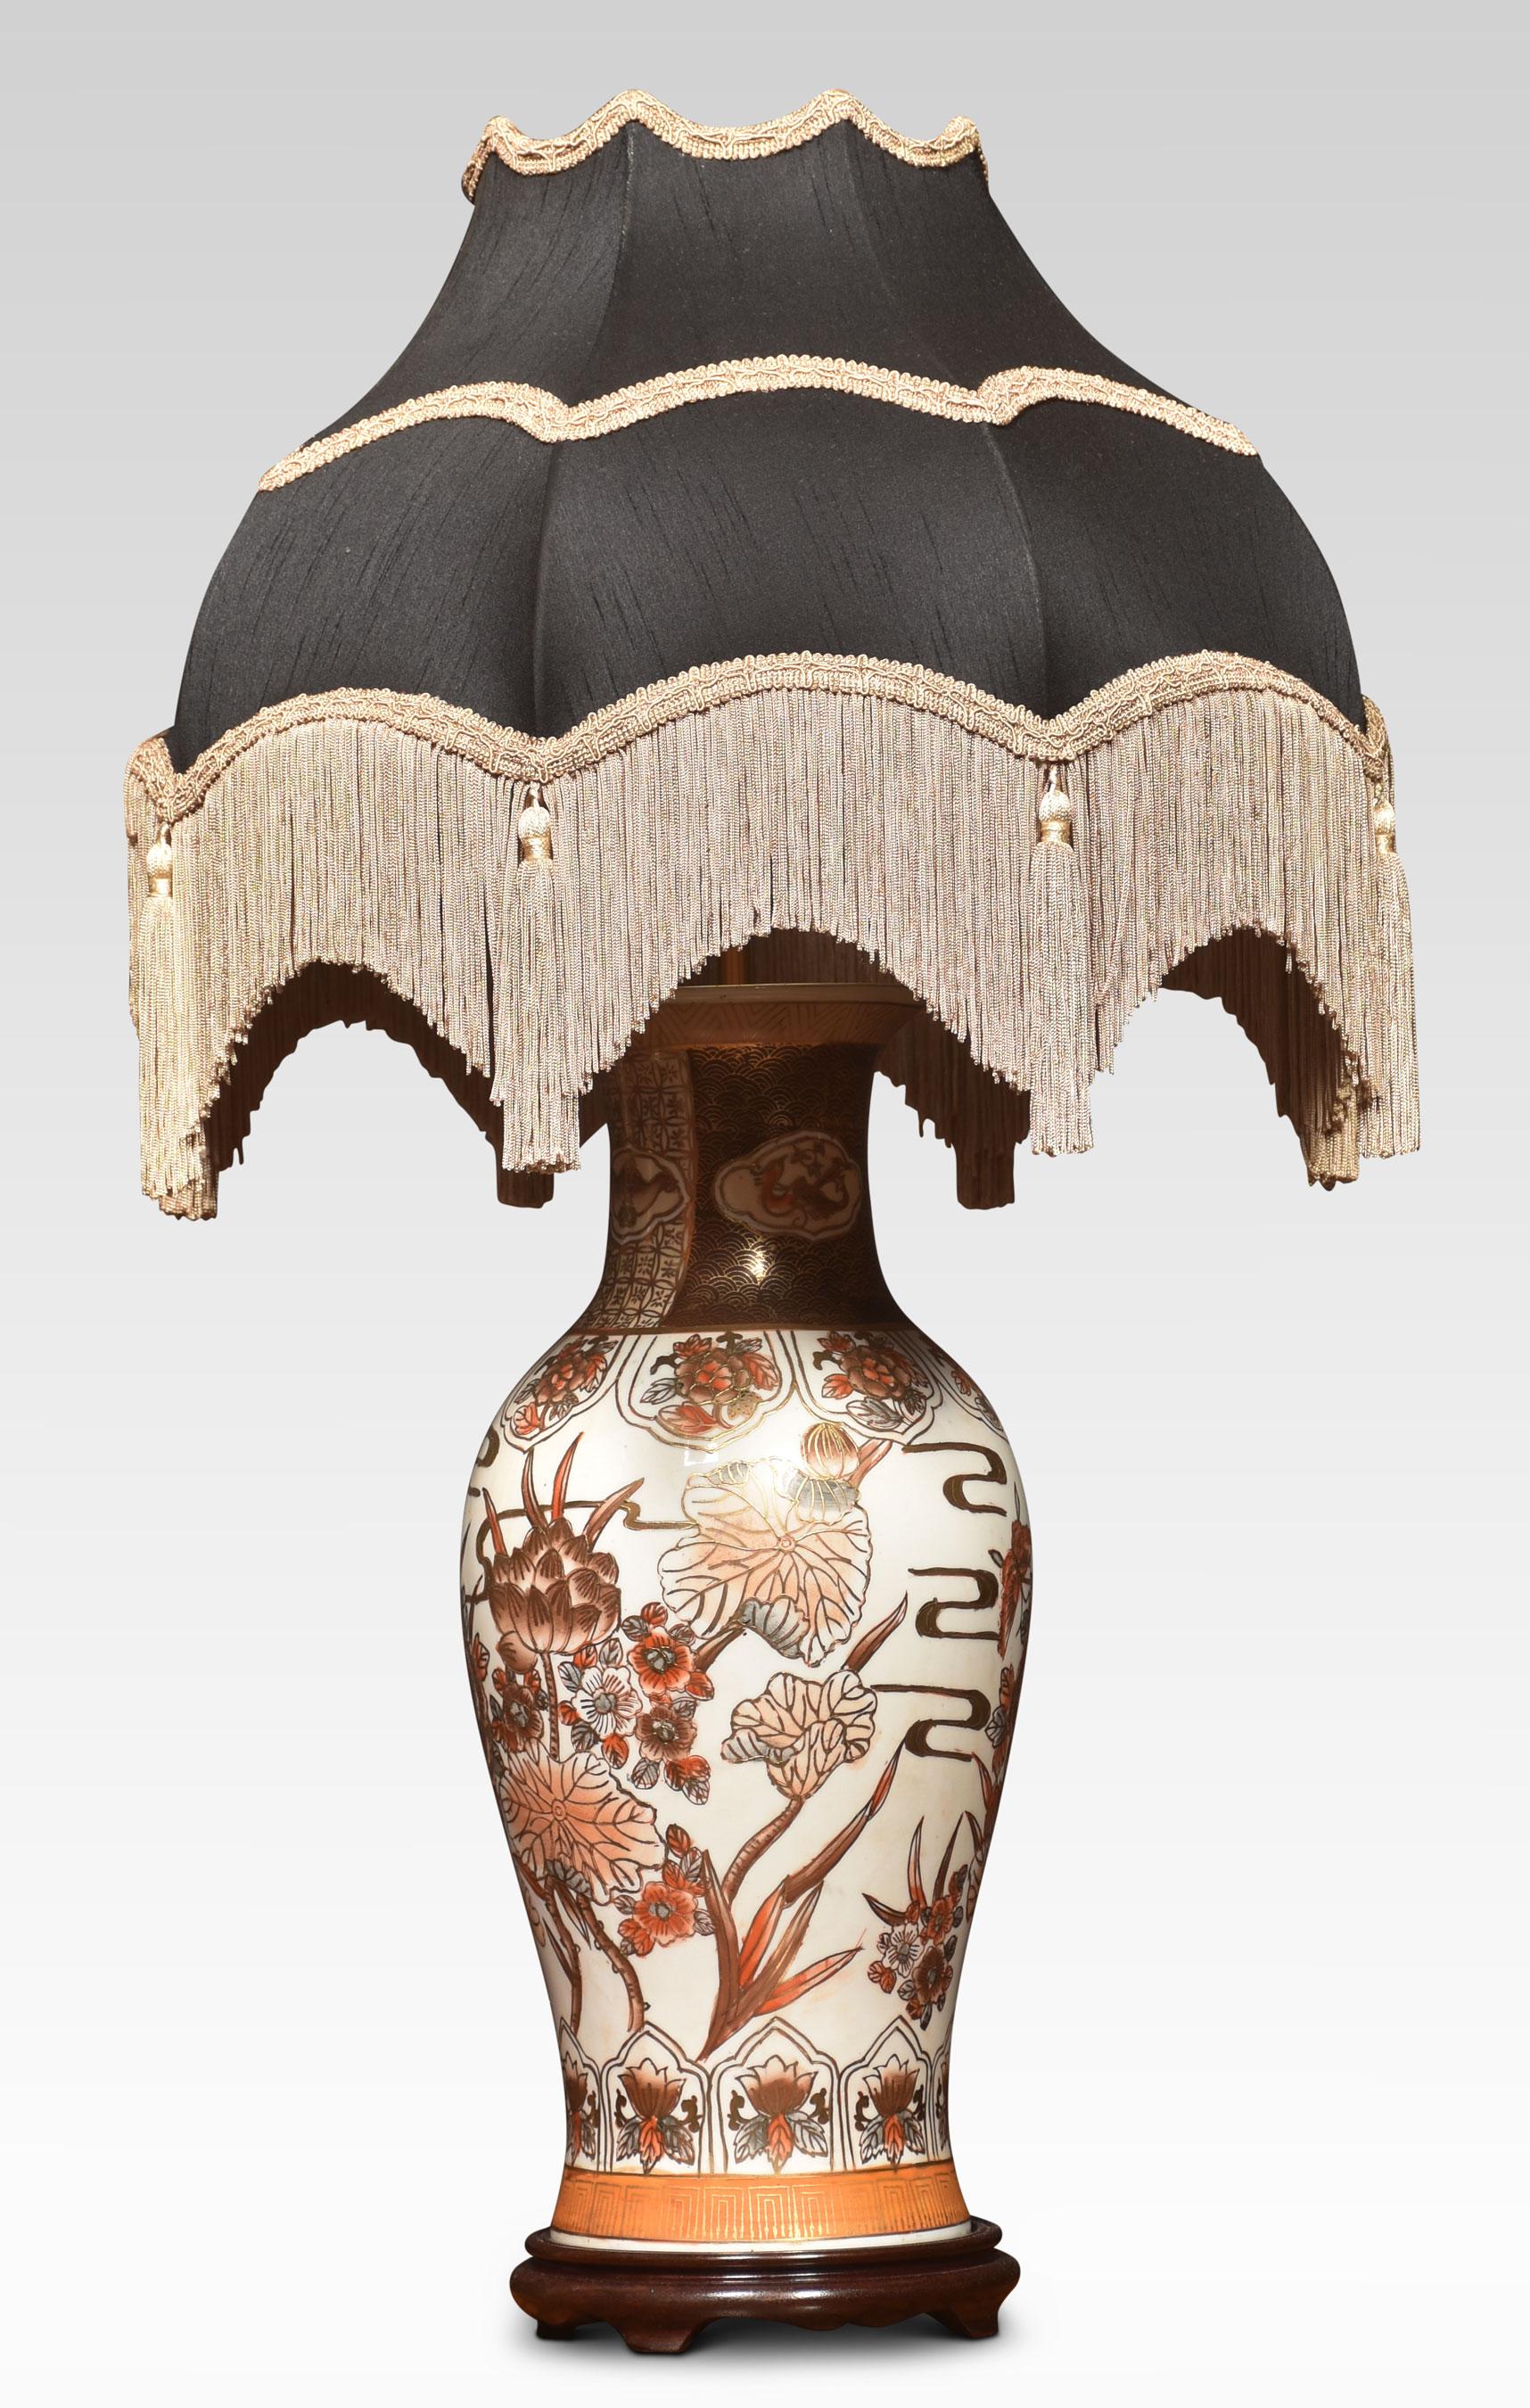 Japanese Satsuma porcelain vases lamp of baluster form raised up on stepped wooden base. The lampshade is not included.
Dimensions
Height 23 Inches
Width 8.5 Inches
Depth 8.5 Inches.